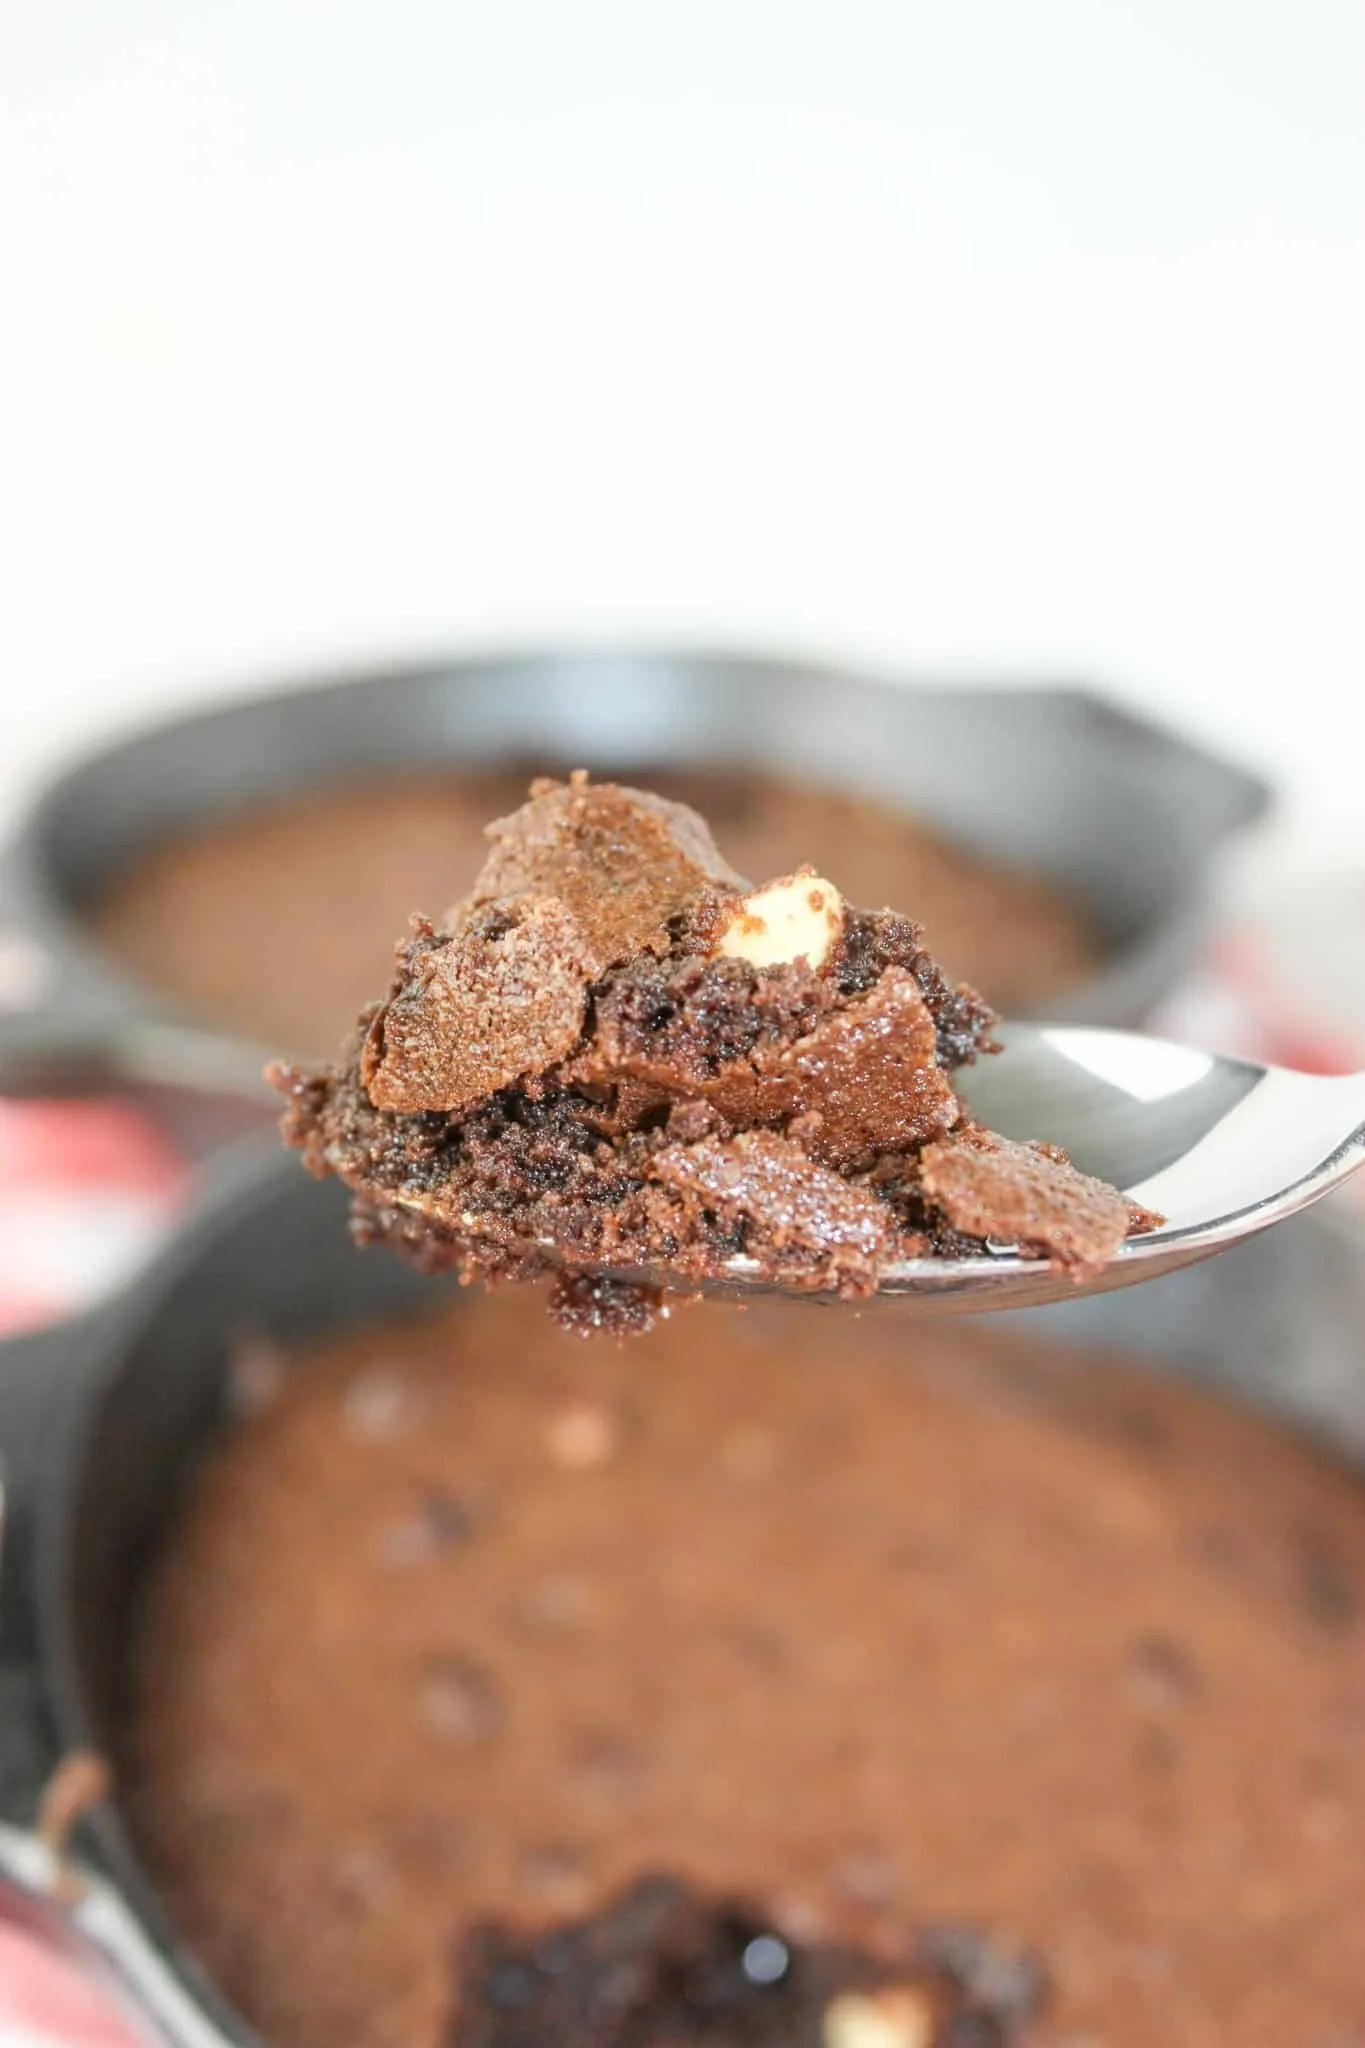 These fudgy, triple chocolate brownies are a decadent treat if you have been avoiding desserts due to a gluten intolerance.  Baked in mini cast iron skillets these brownies do not disappoint. 